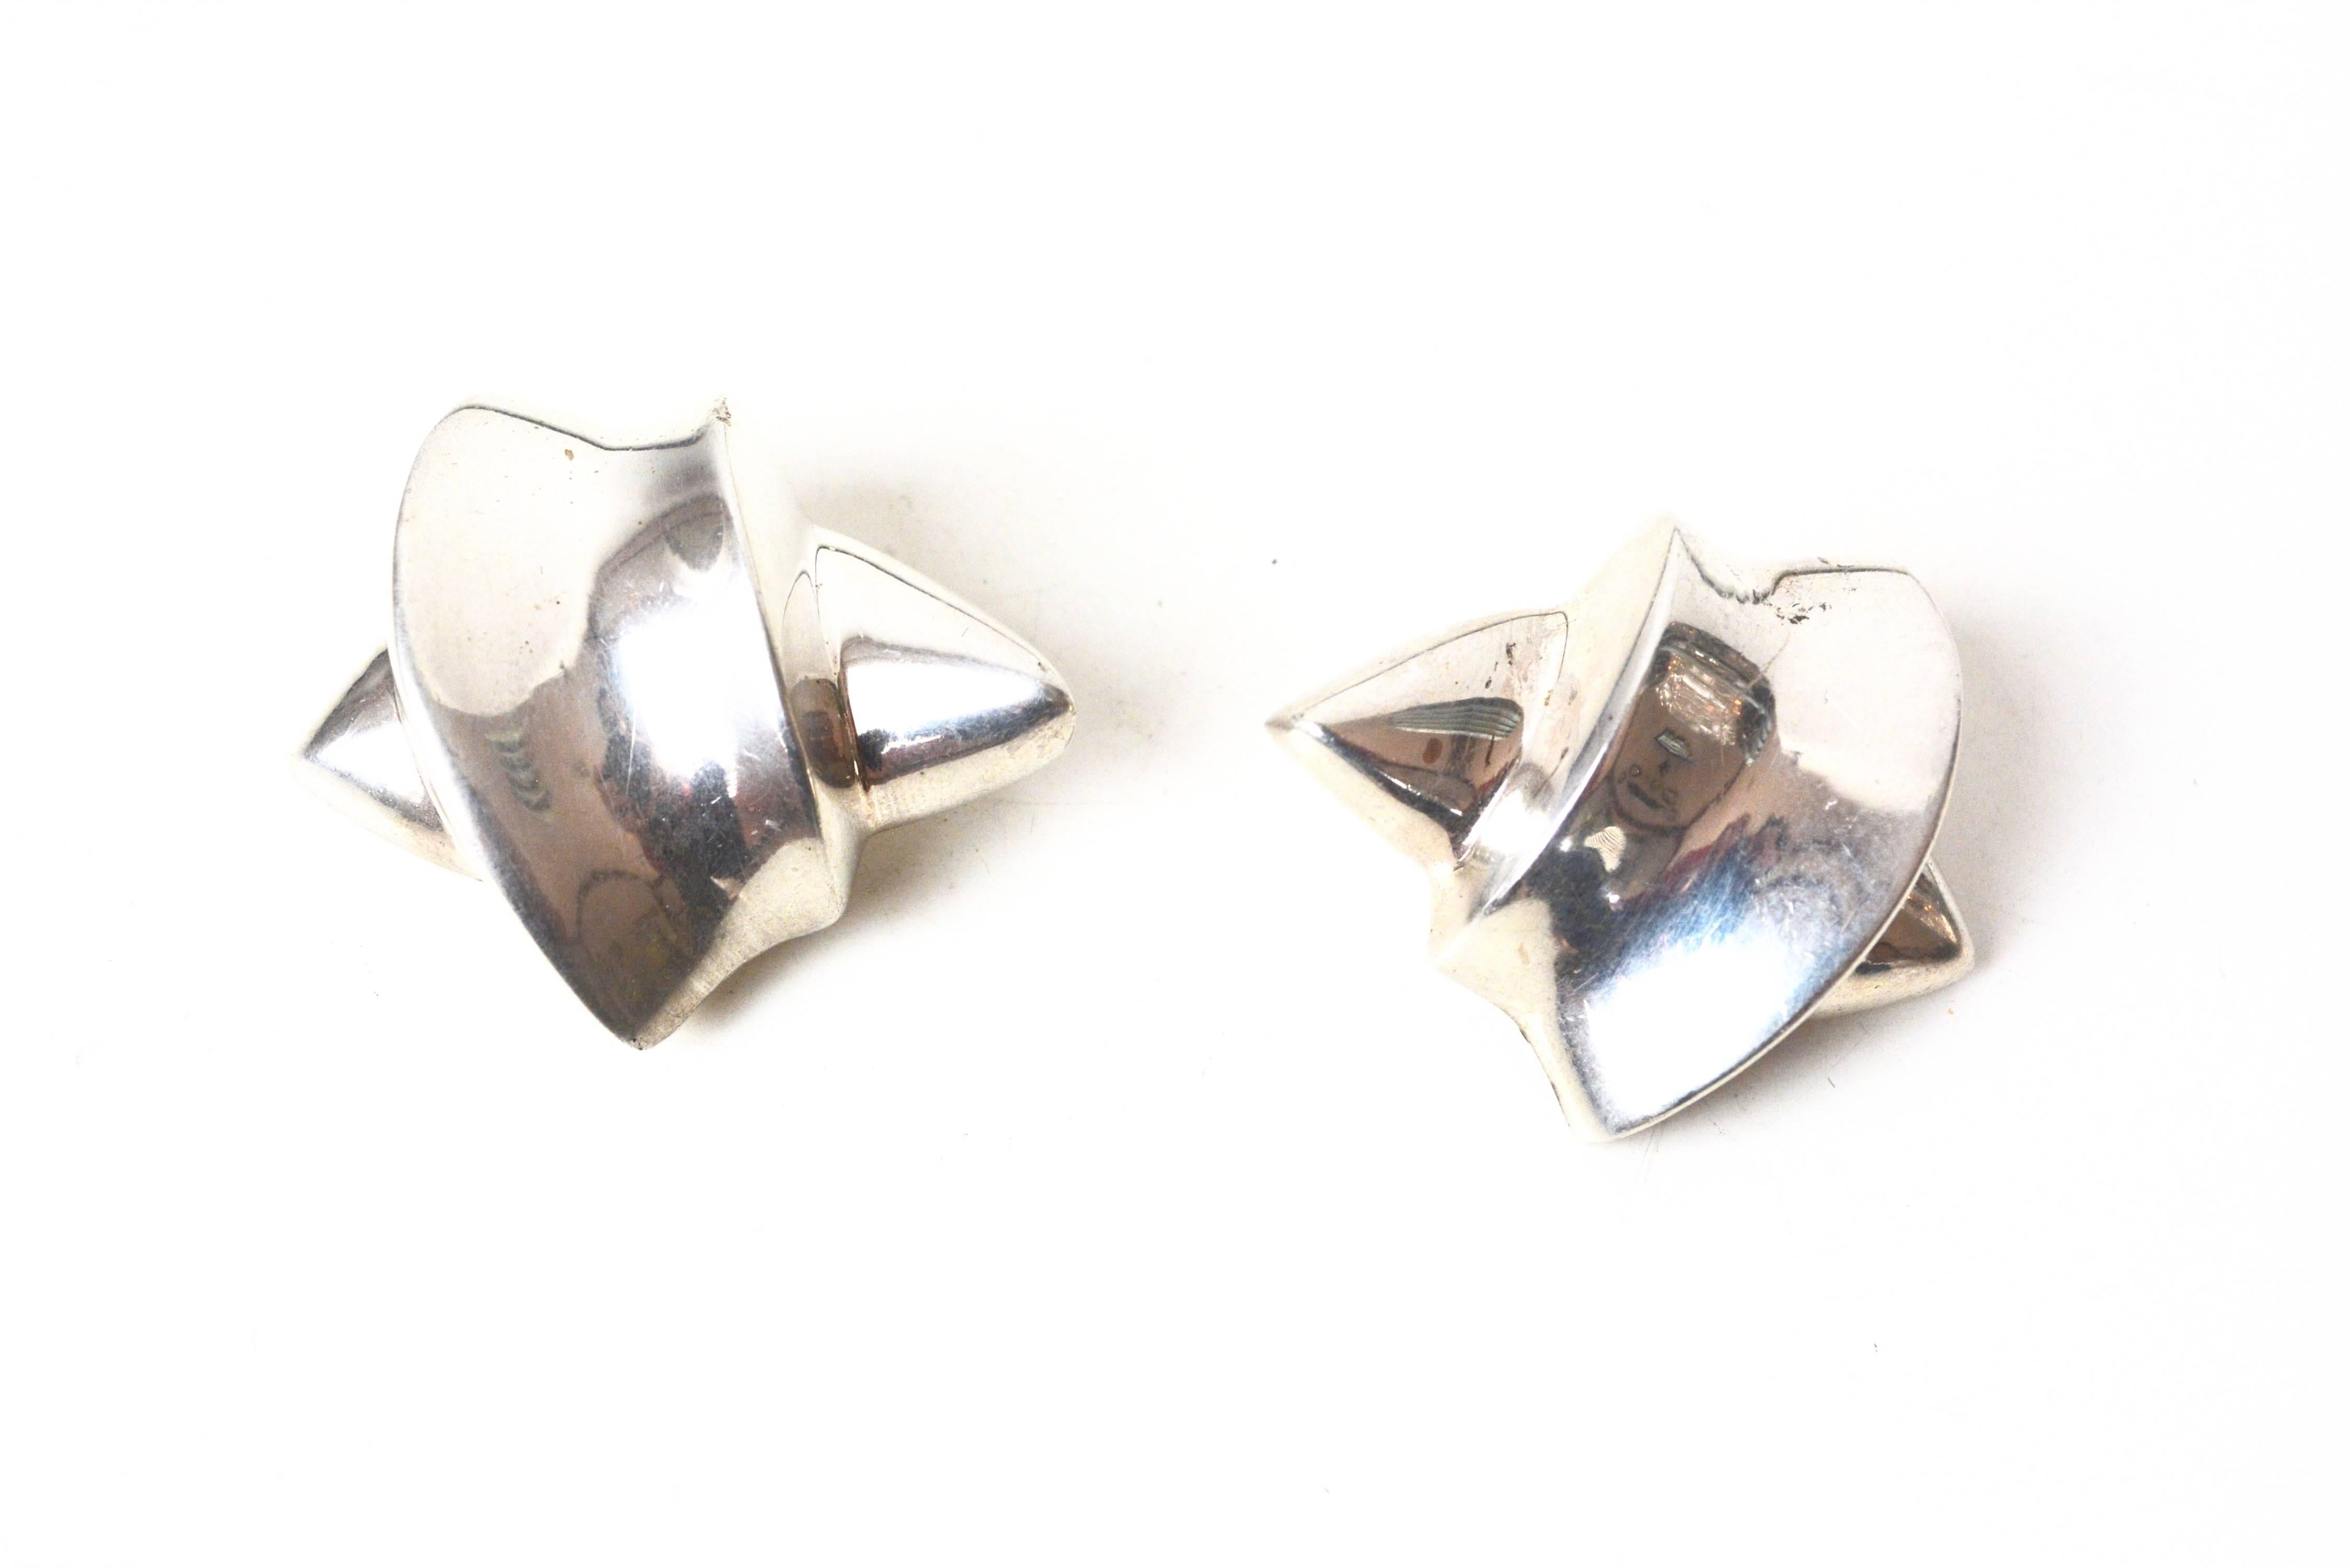 Signed Patricia Von Musulin sterling silver earrings in the abstract organic style she is known for. Circa 1985. Marked. Minor wear, tarnish. 1.75" long.